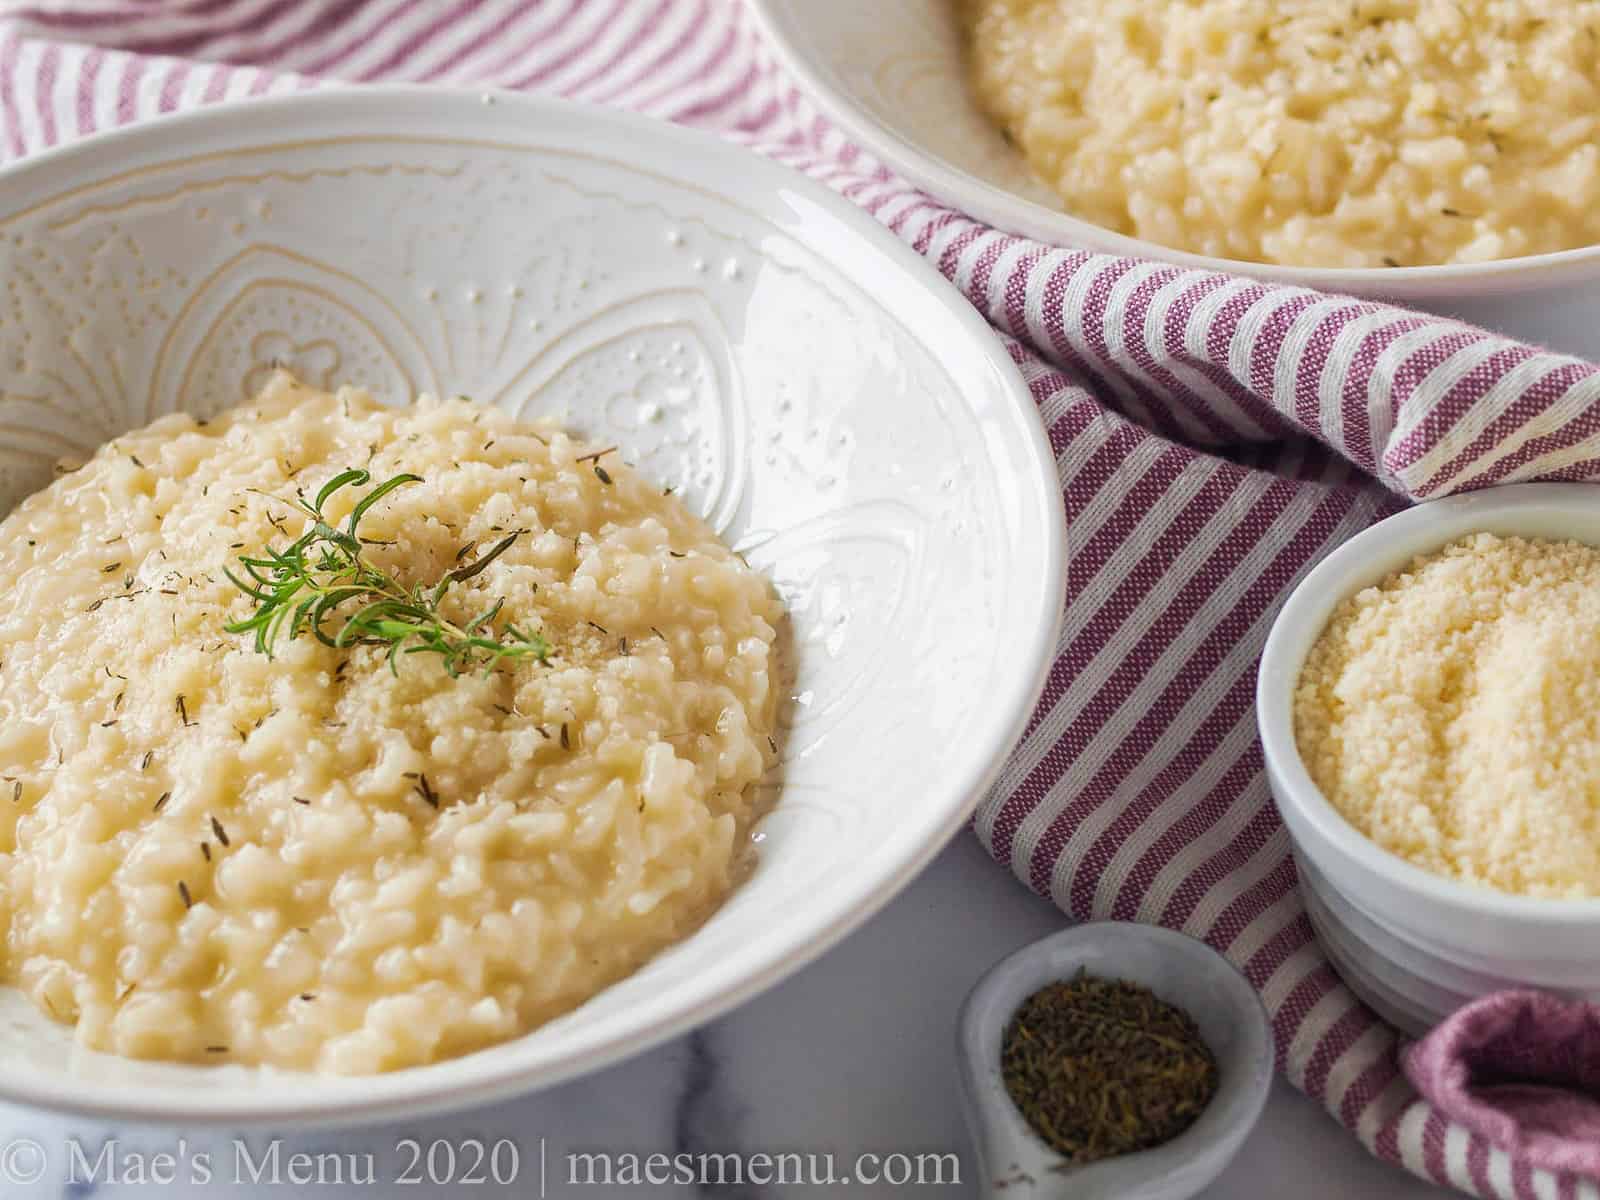 Two white bowls of risotto next to a cup of parmesan cheese and a spoonful of herbs